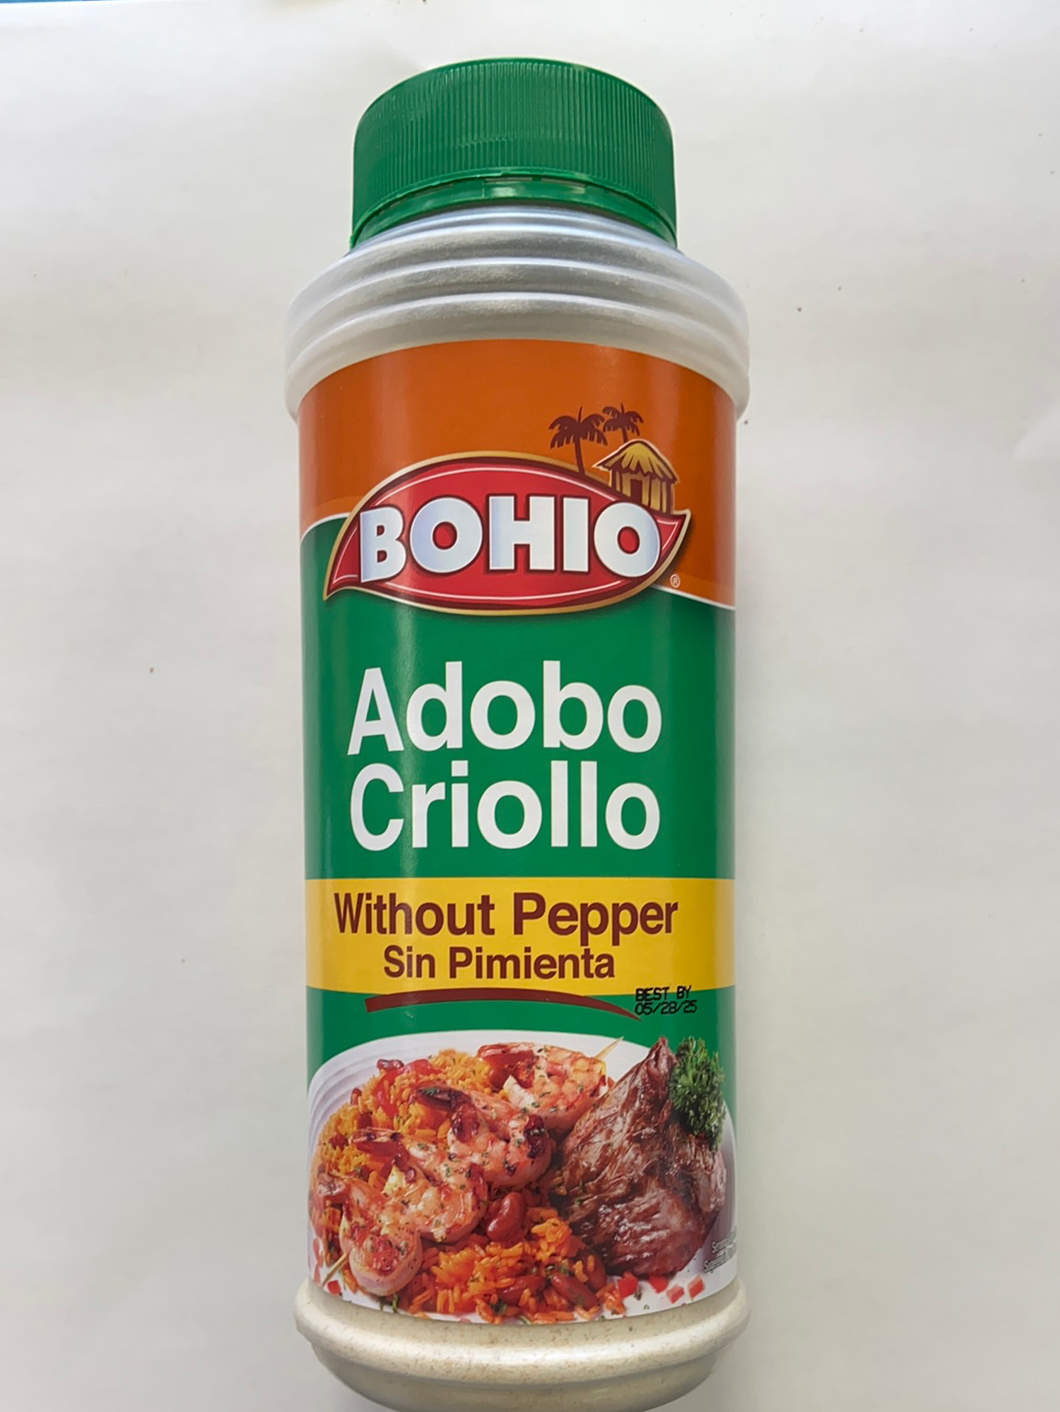 Adobo Criollo with or without Pepper, Bohio